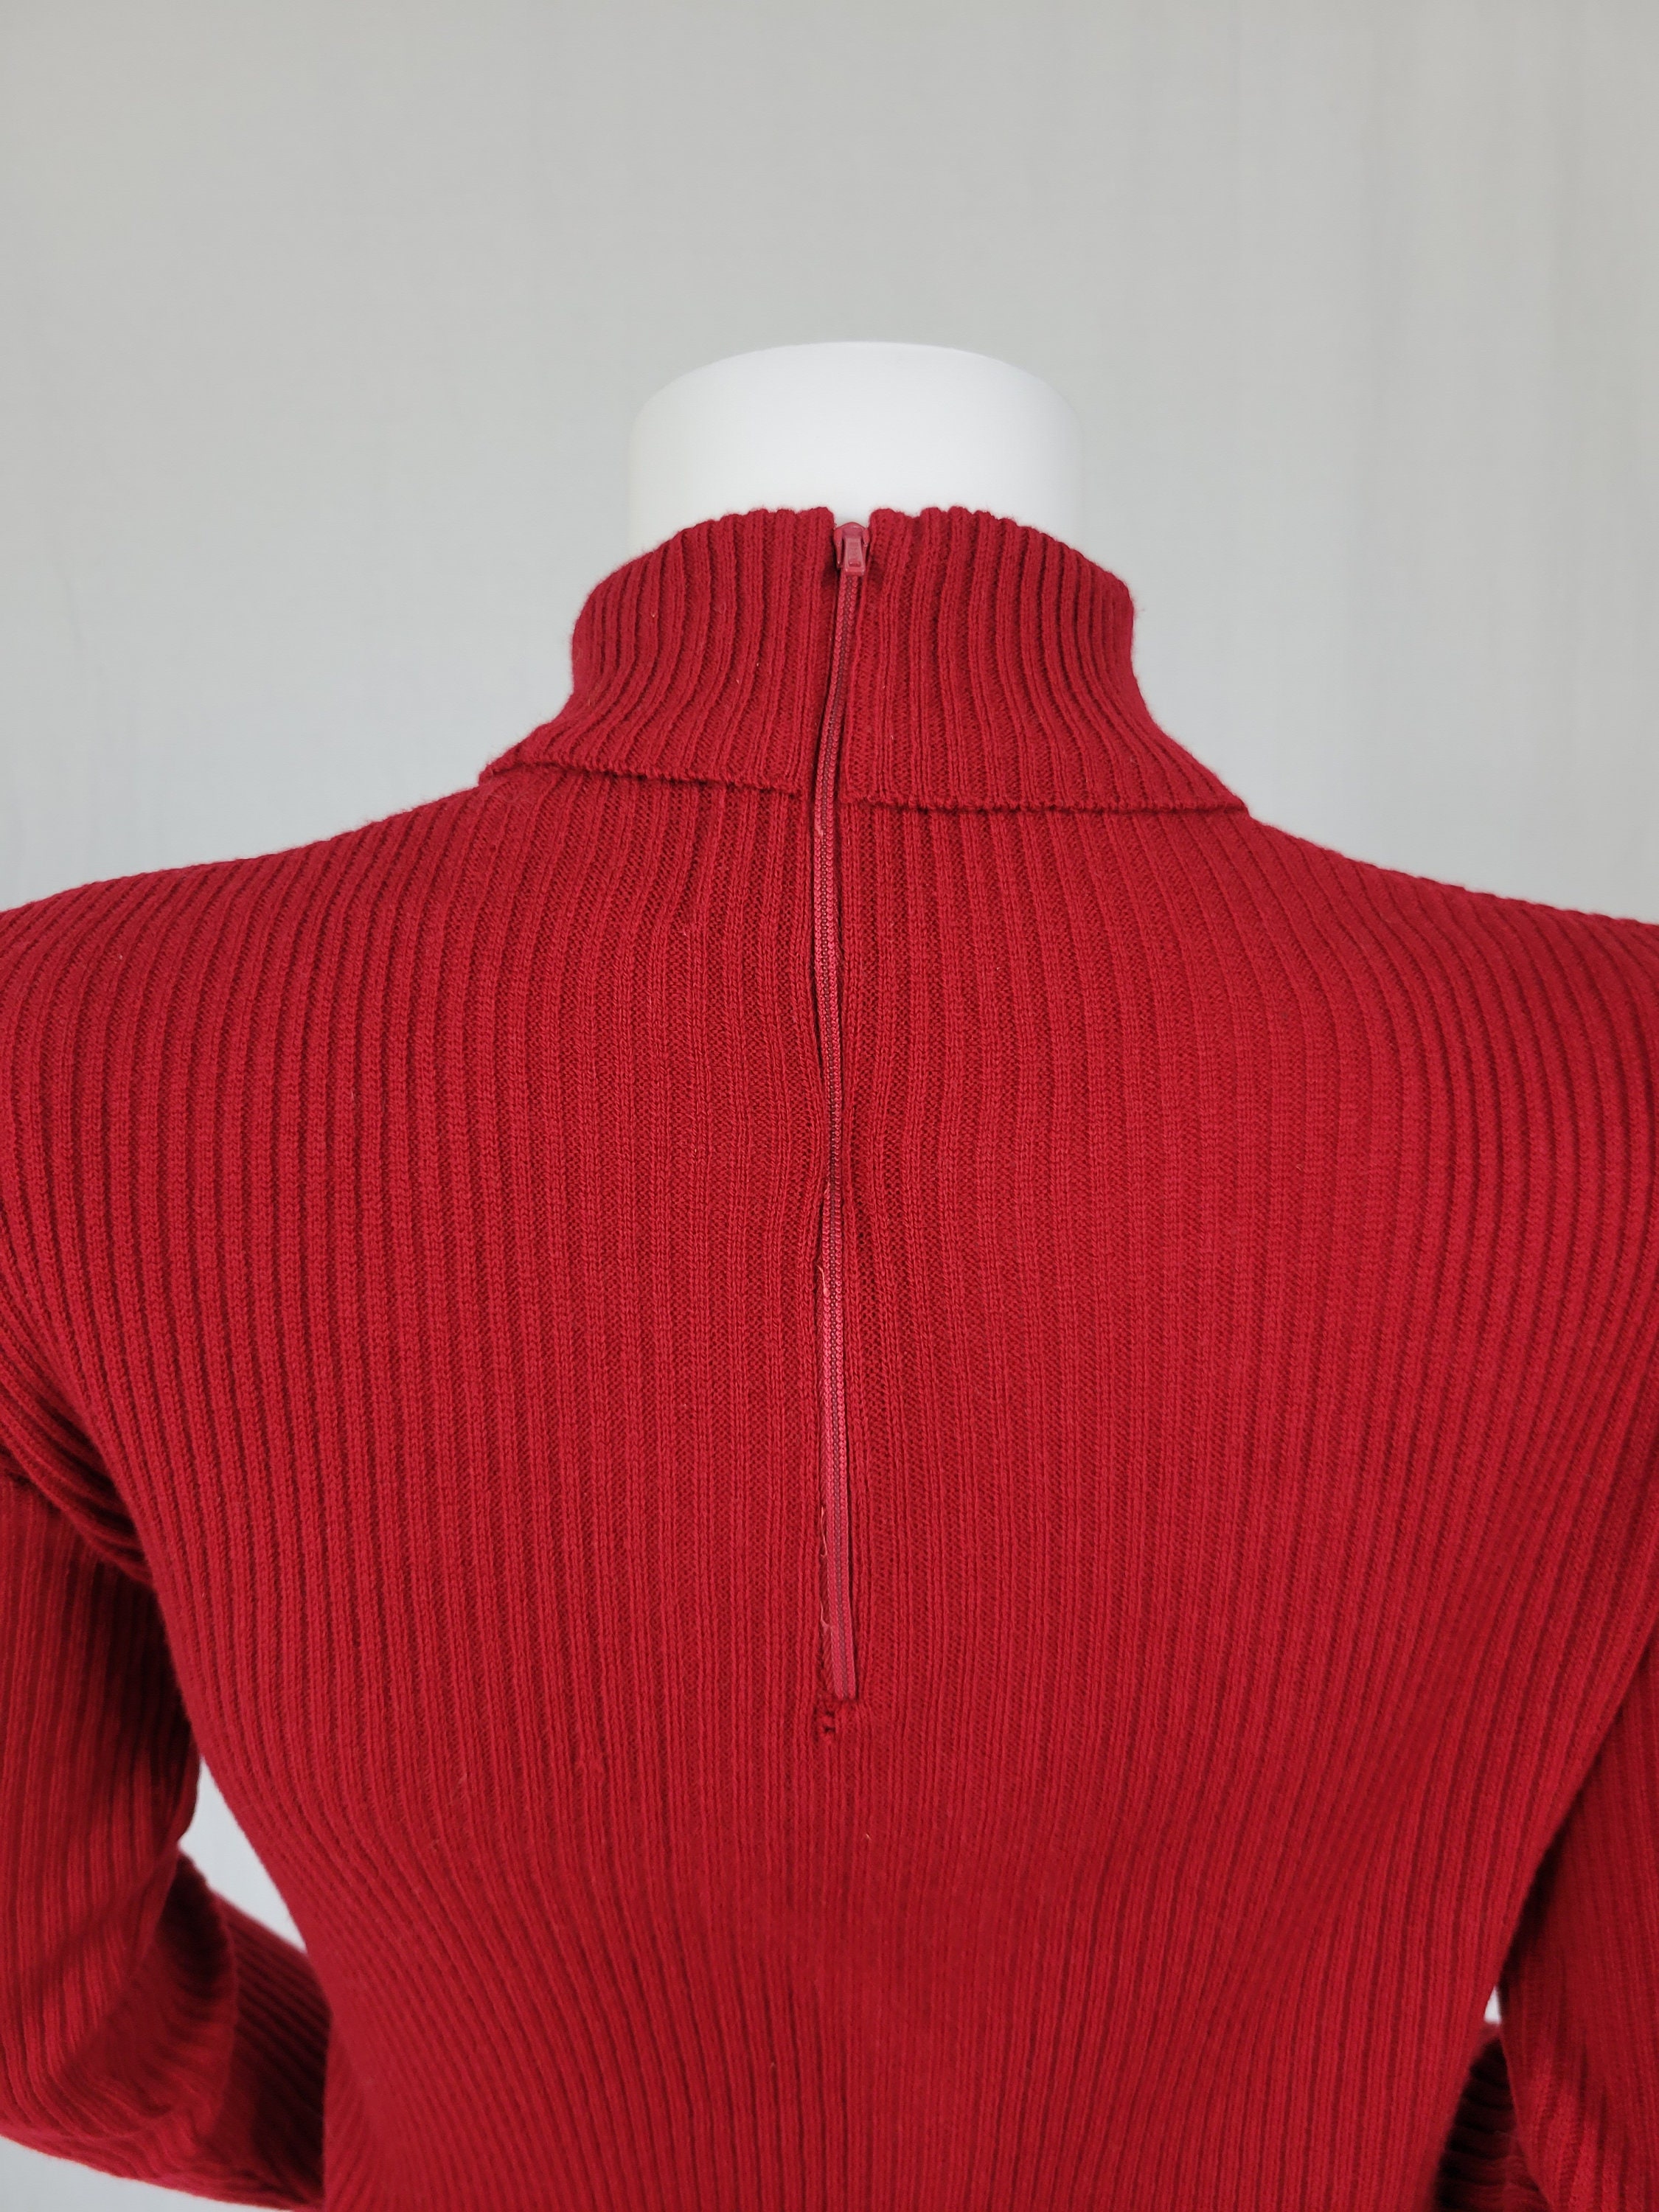 1970's Merlot Red Ribbed Acrylic Turtle Neck Zip up Knit - Etsy